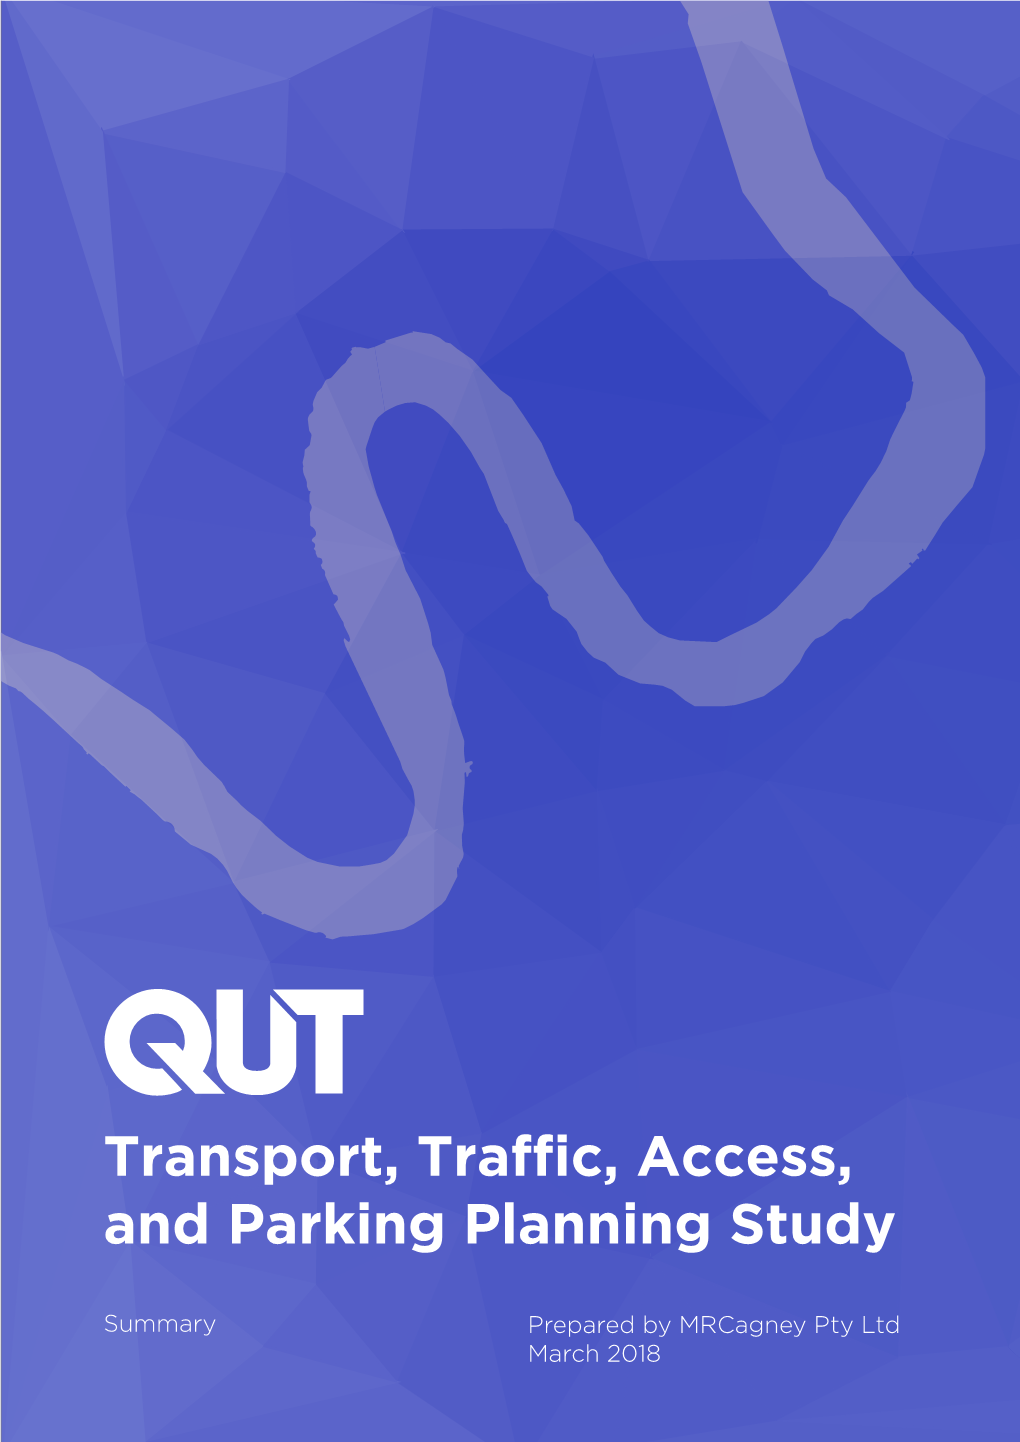 Transport, Traffic, Access, and Parking Planning Study